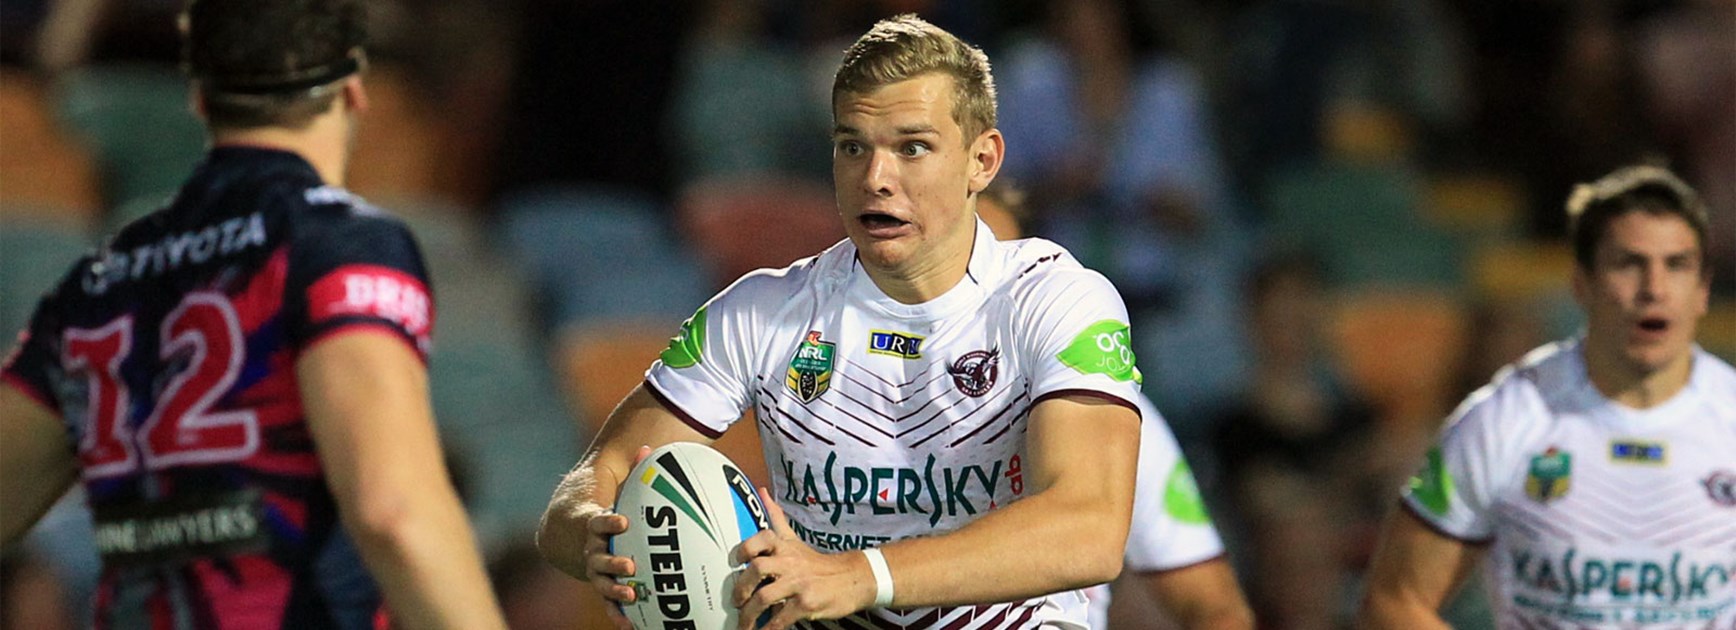 Sea Eagles youngster Tom Trbojevic in action against North Queensland.